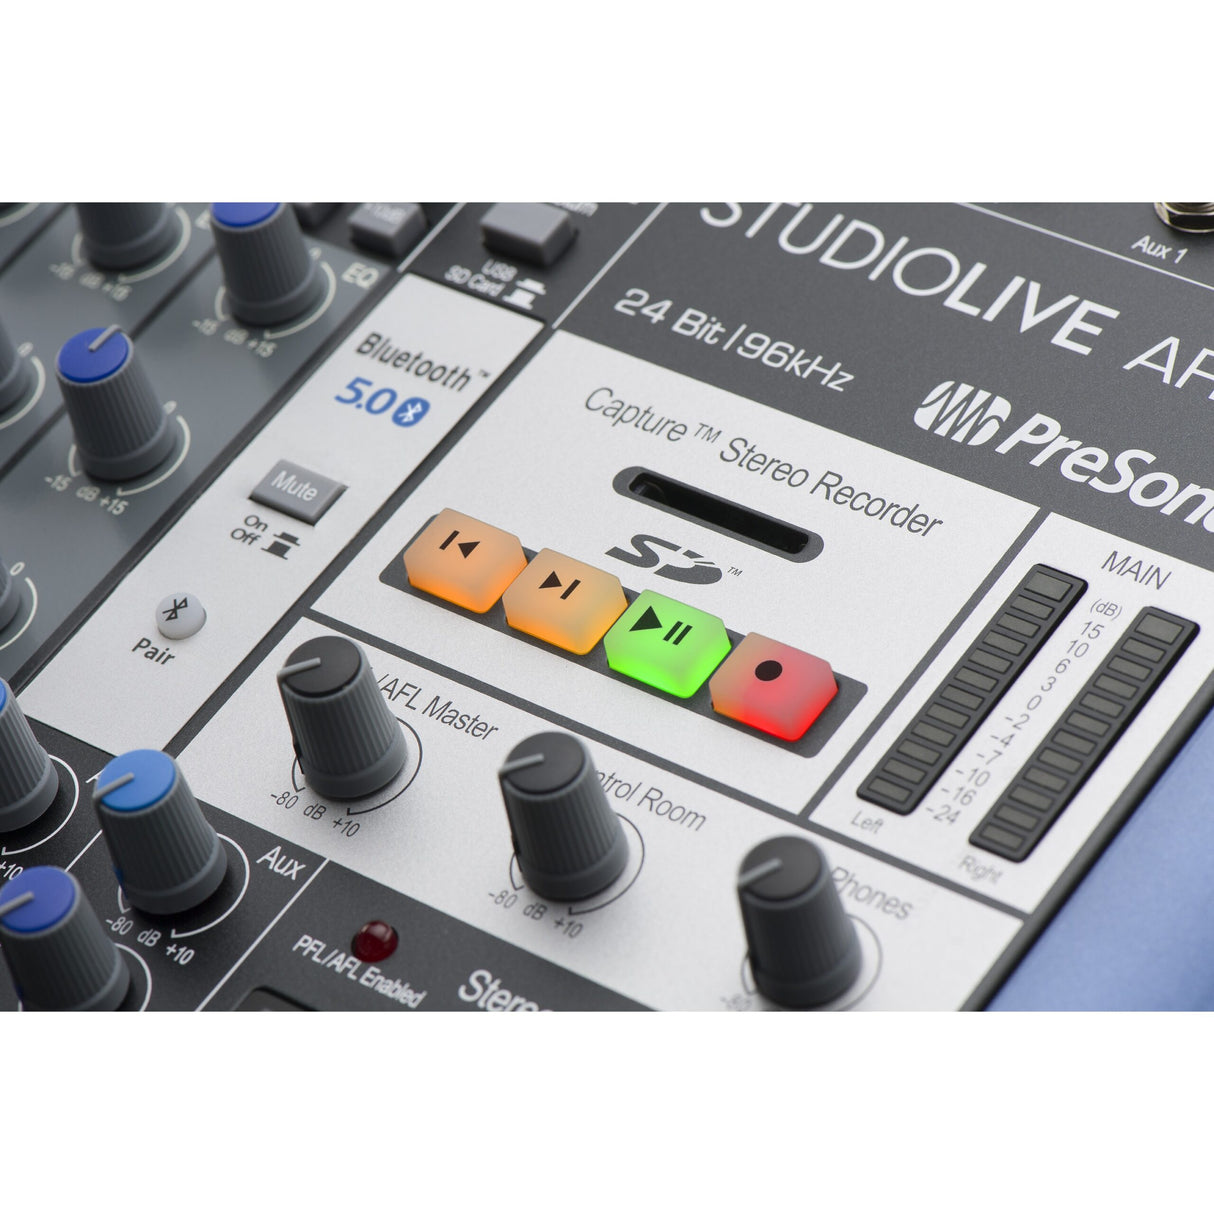 PreSonus StudioLive AR12c 14-Channel USB-C Audio Interface, Analog Mixer and Stereo SD Recorder